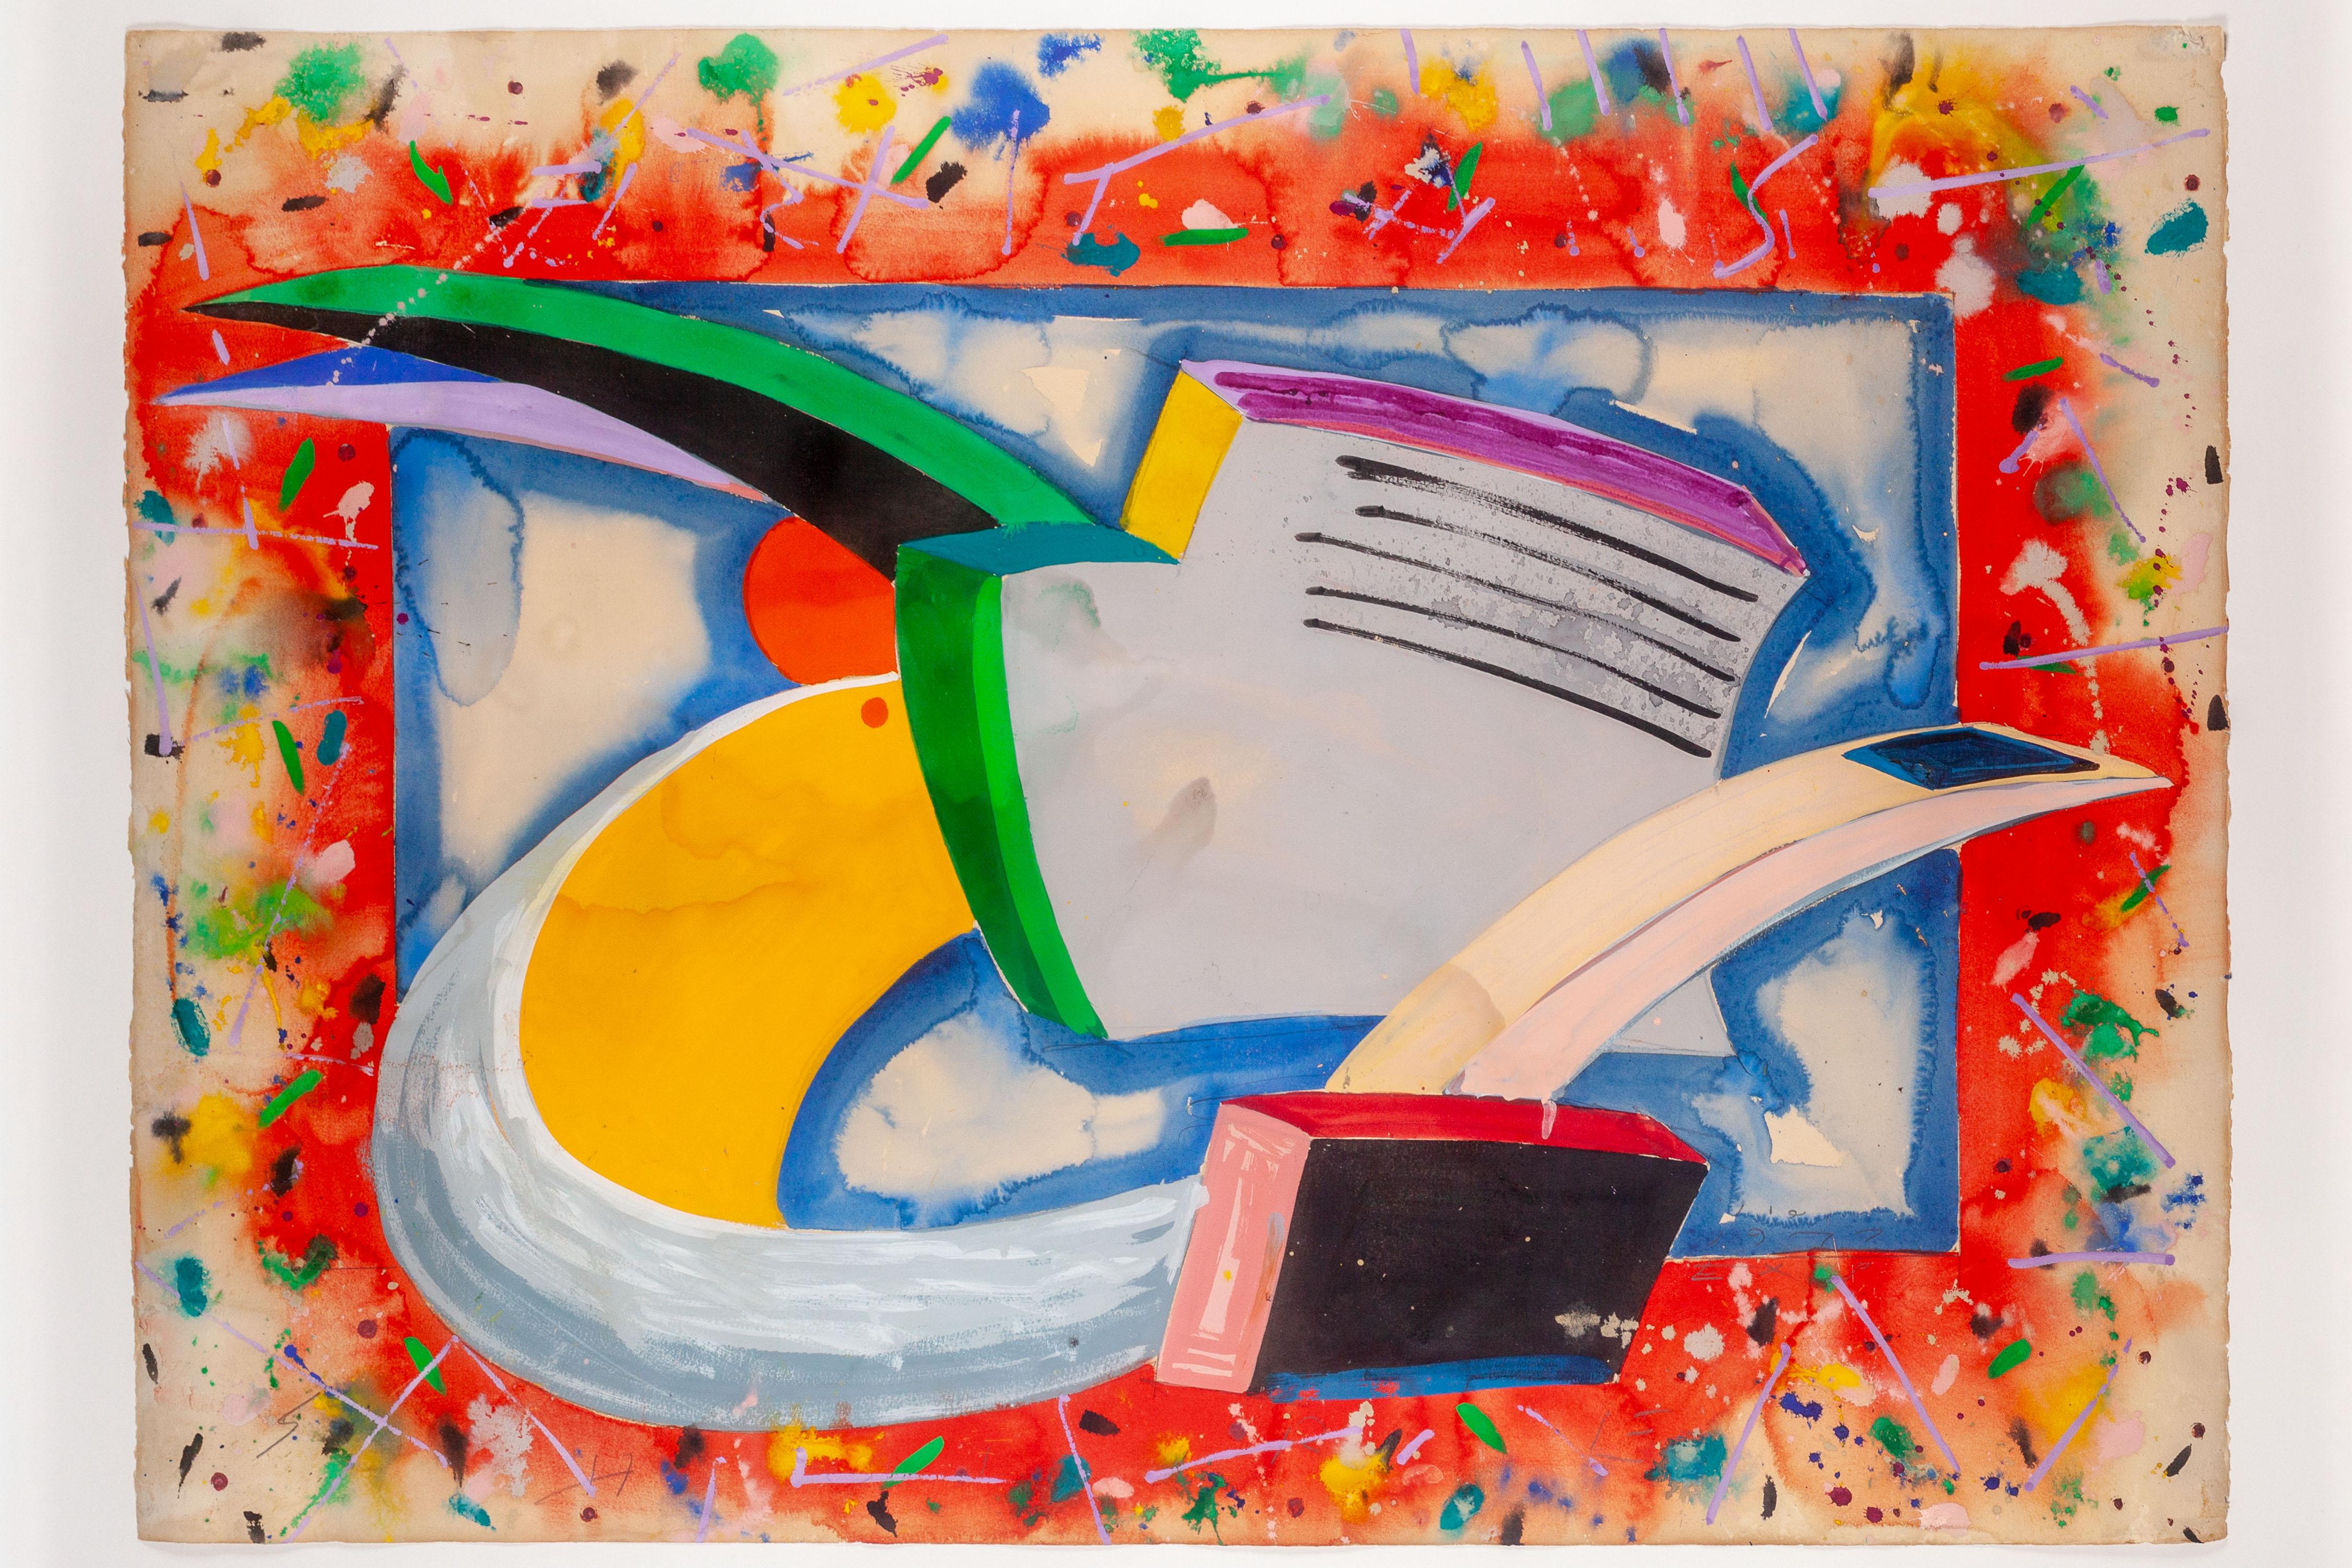 A early 1977 Peter Shire painting, already destructuring our teapots with his kindly-irreverent taste for asymmetry, for impossible architecture and color feelings explosion expressed in the most Californian color palette. Everything that made Peter